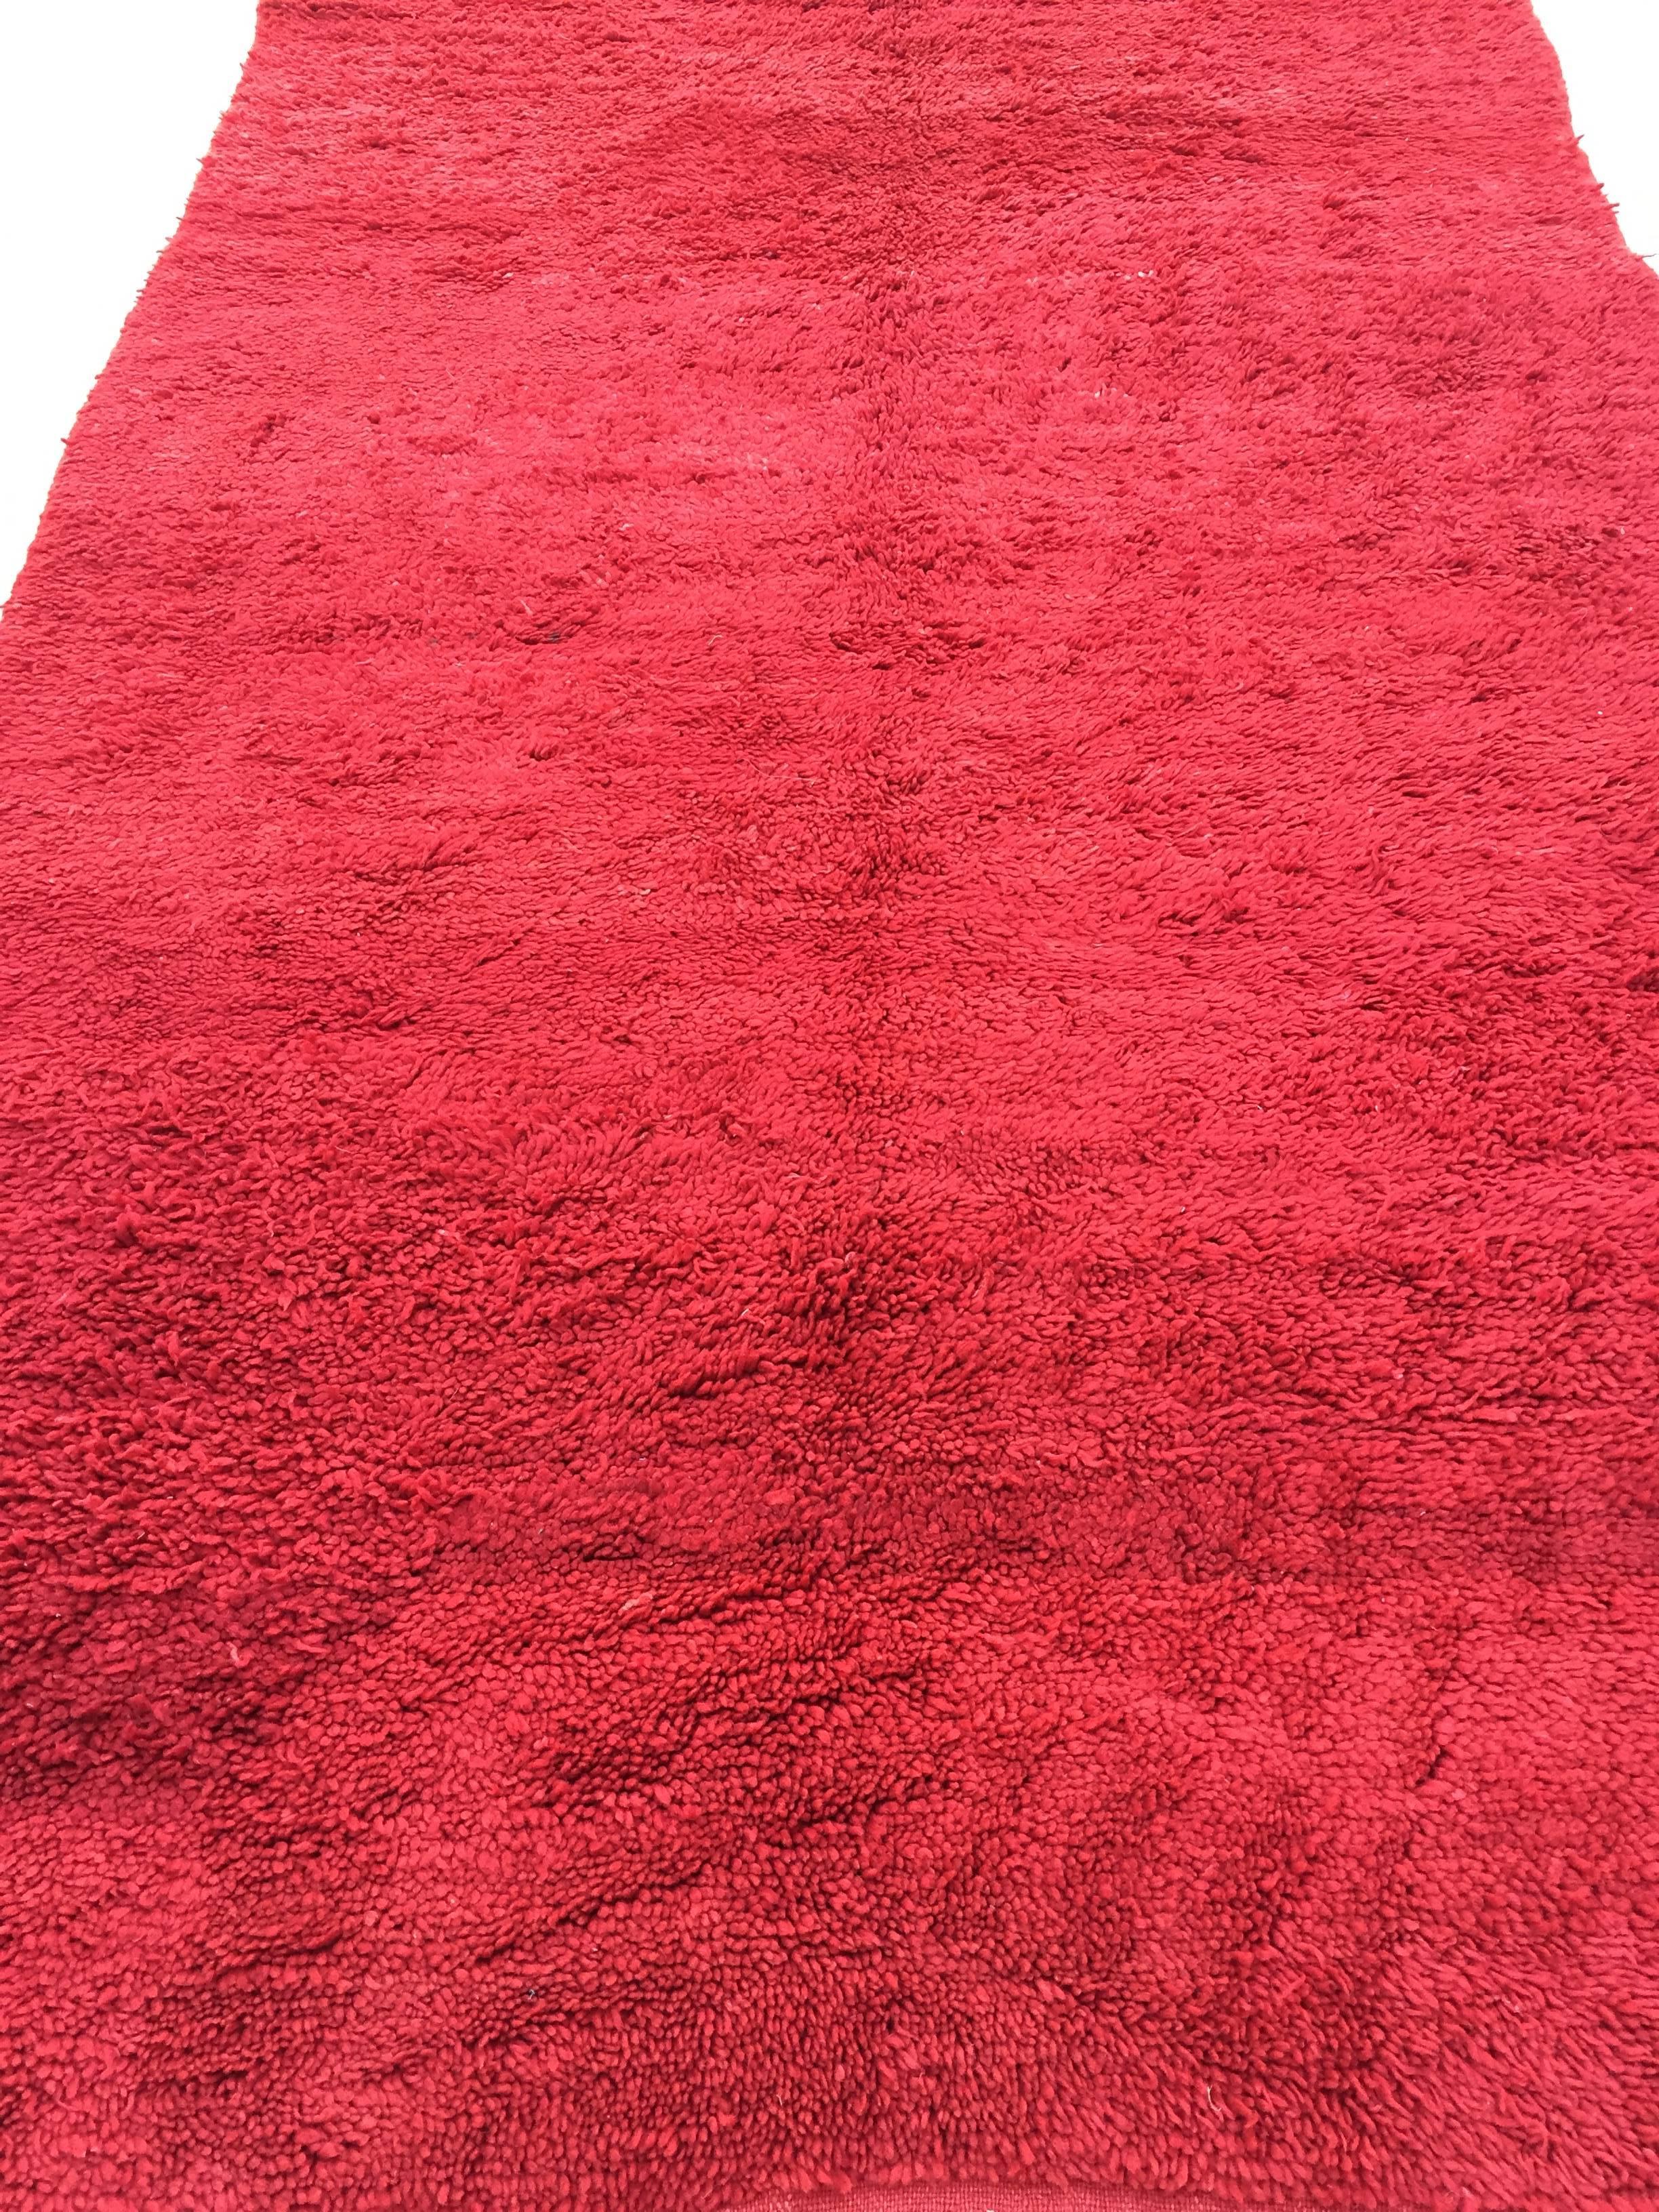 1960s Vintage Red Ethnic Moroccan Rug In Good Condition For Sale In North Hollywood, CA